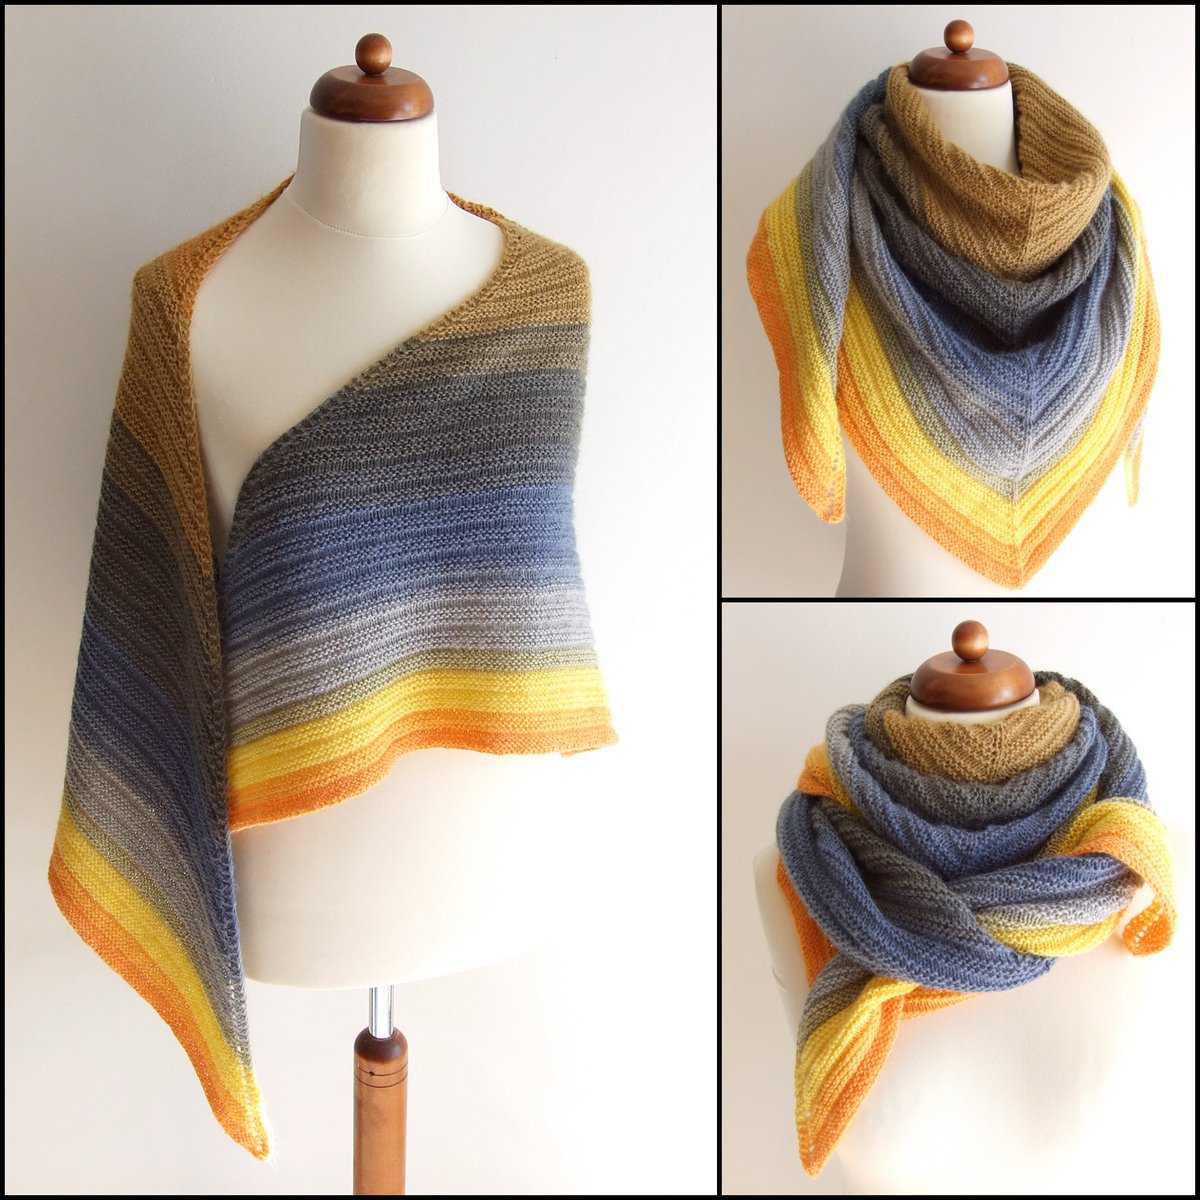 I'm thinking how to describe the colors in this. Sun coming up after gloomy winter? @Etsy #etsycopon #shopsmall #knitsdeluxe #handmadegifts #handknit #accessories #yellow #grey #knittedshawl #giftideas #knittedfashion 
available at my #Etsystore